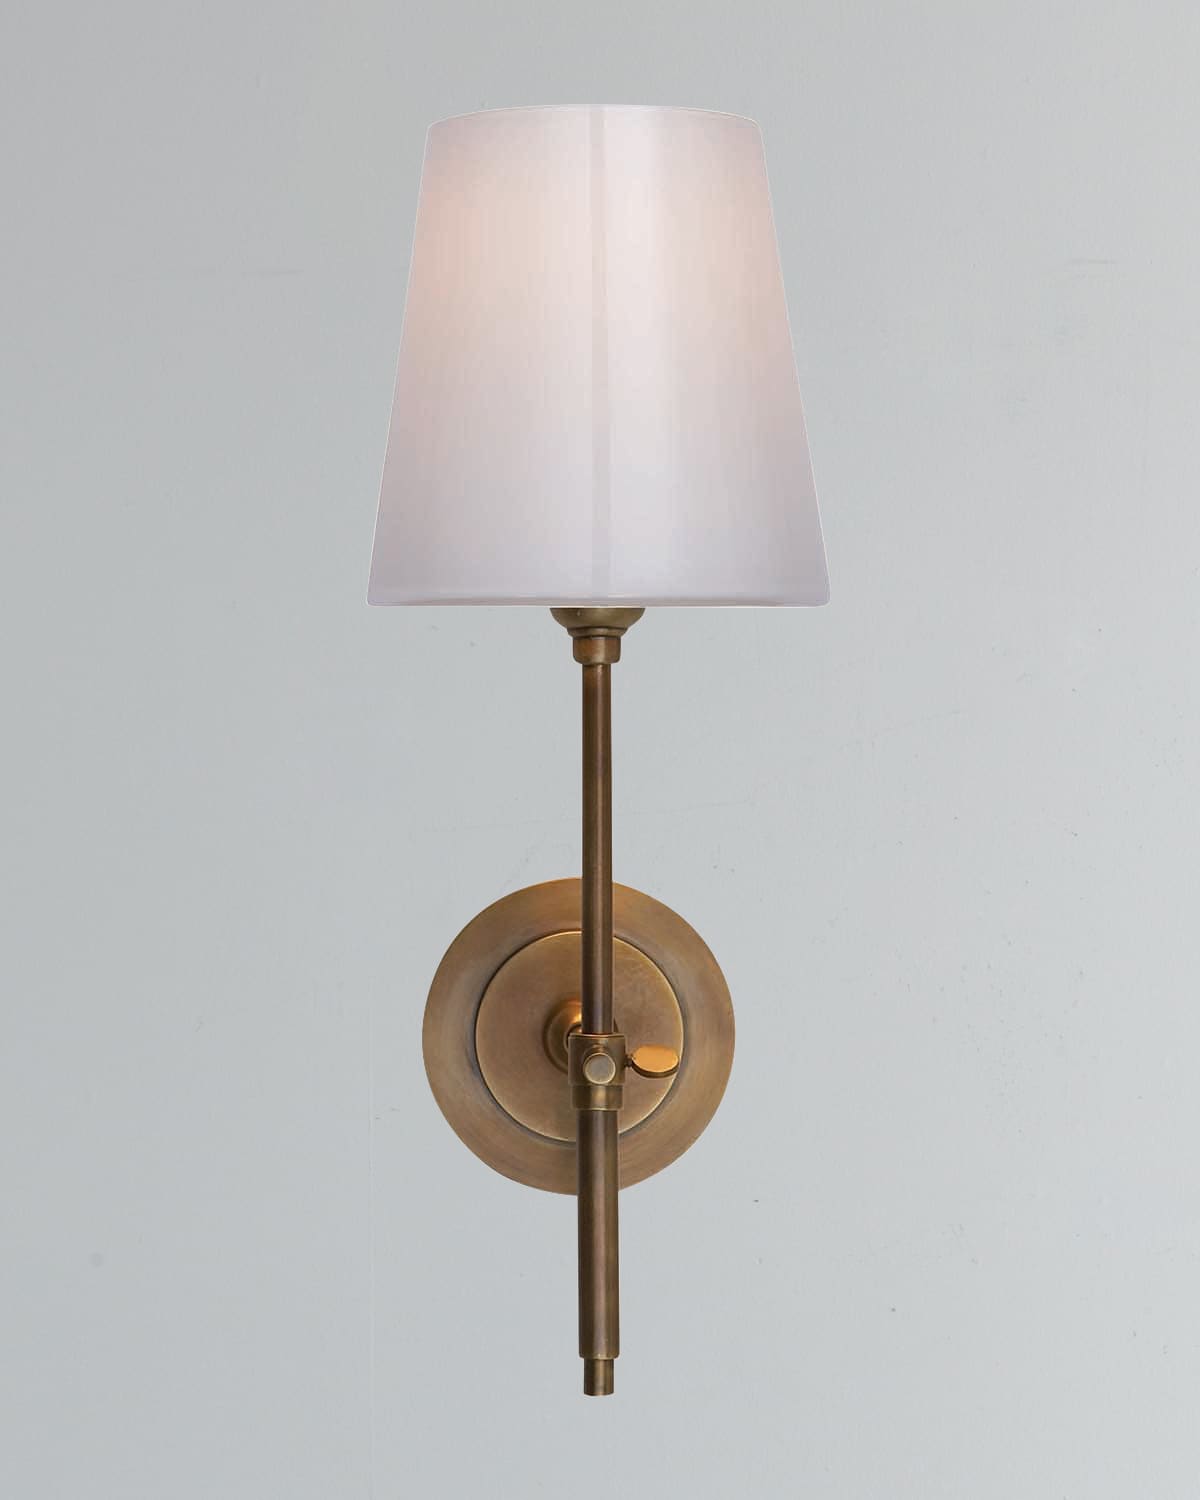 Bryant Sconce with White Glass Shade